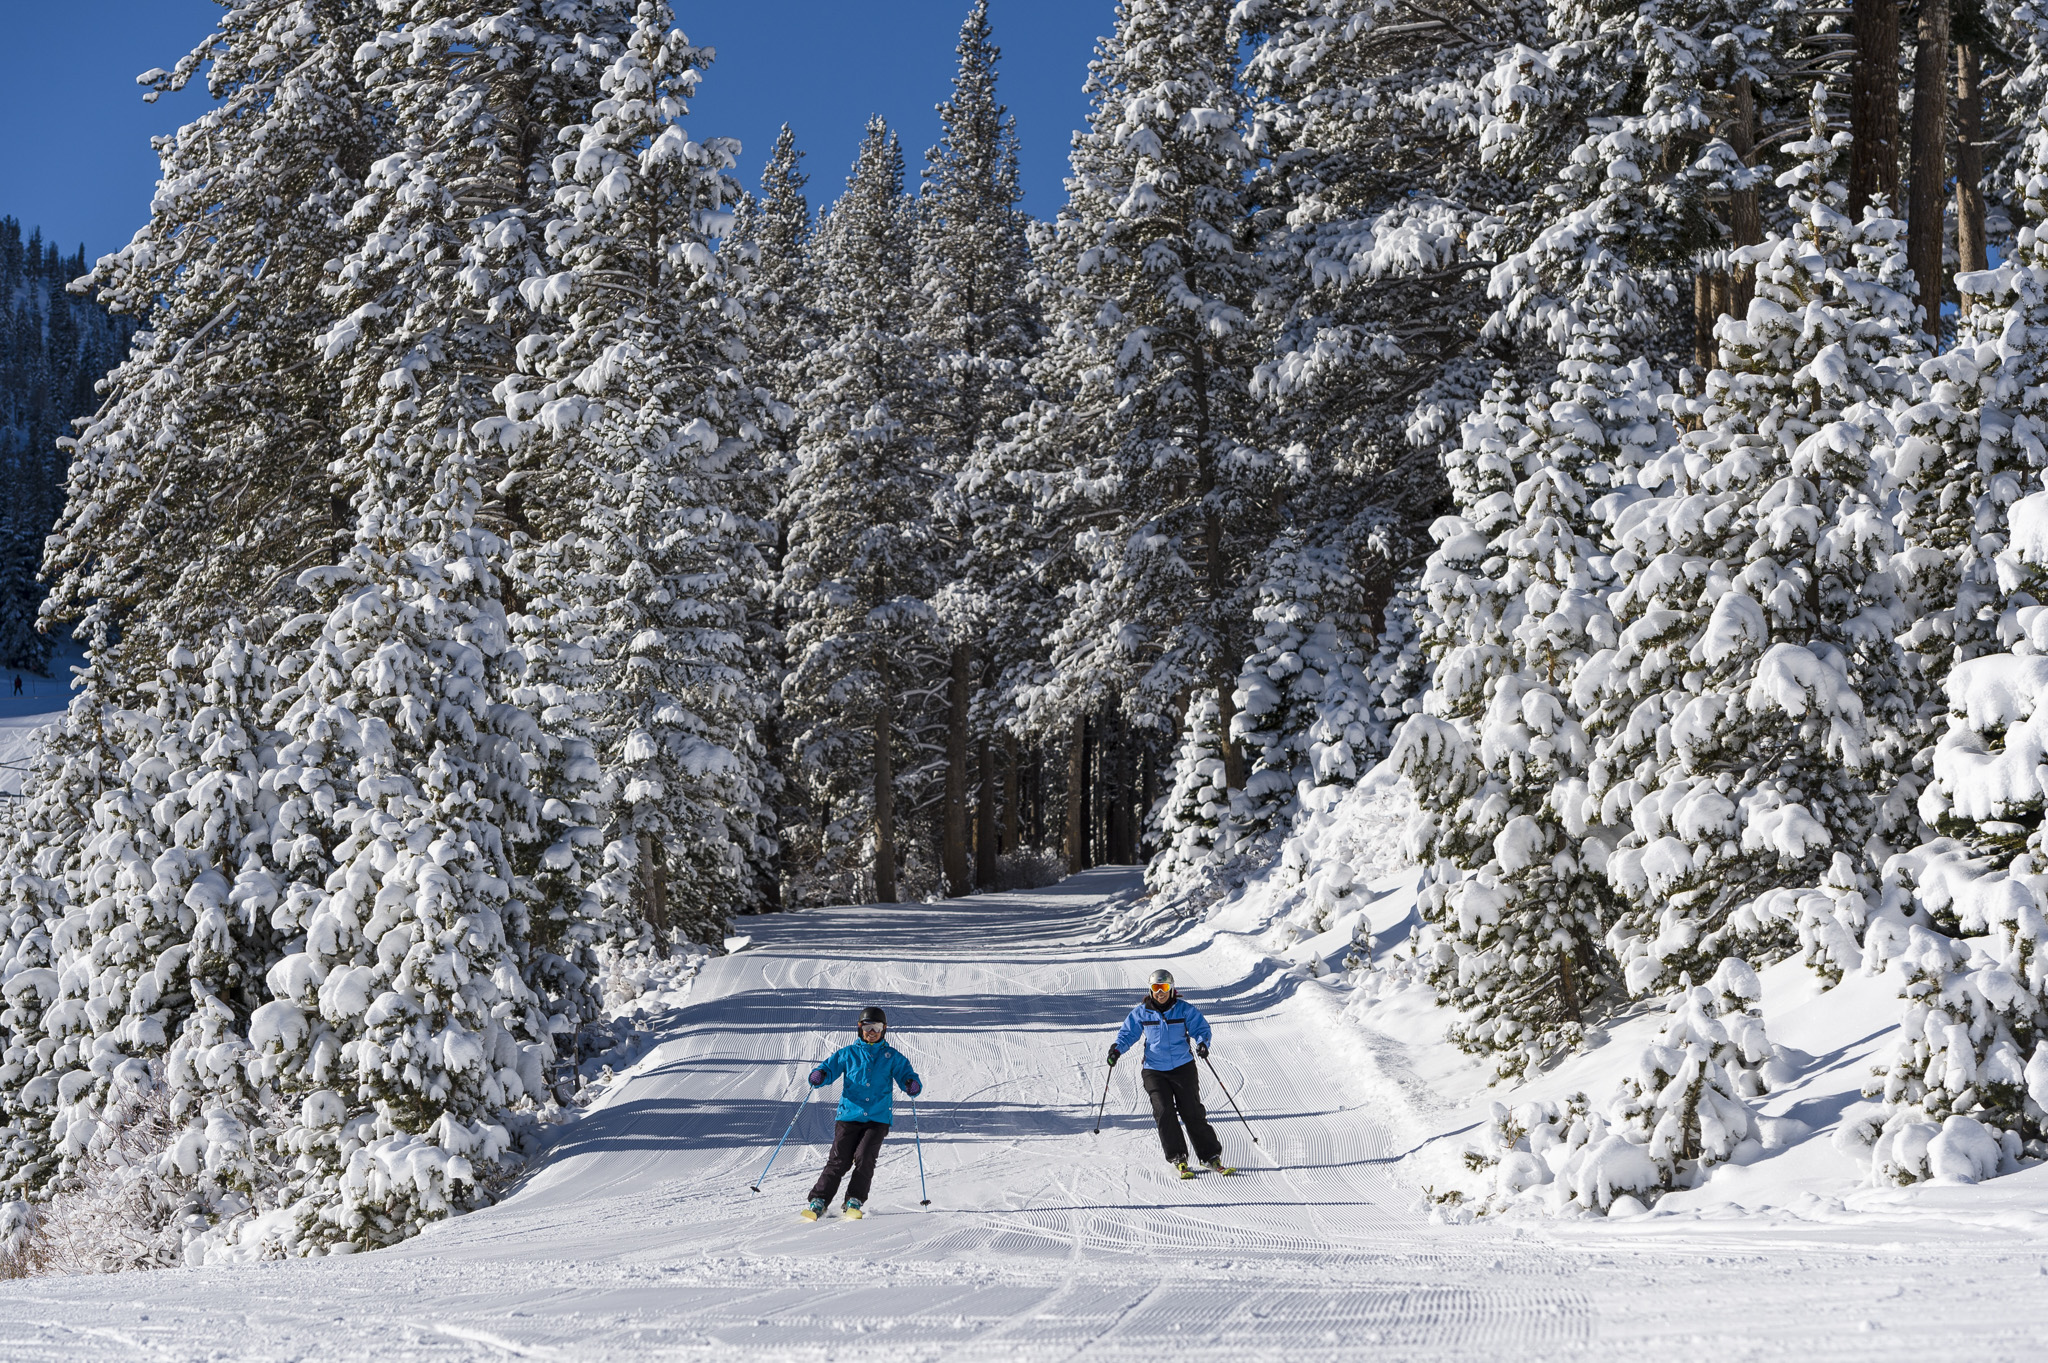 Unique Events and Features at Lake Tahoe Ski Resorts VisitRenoTahoe